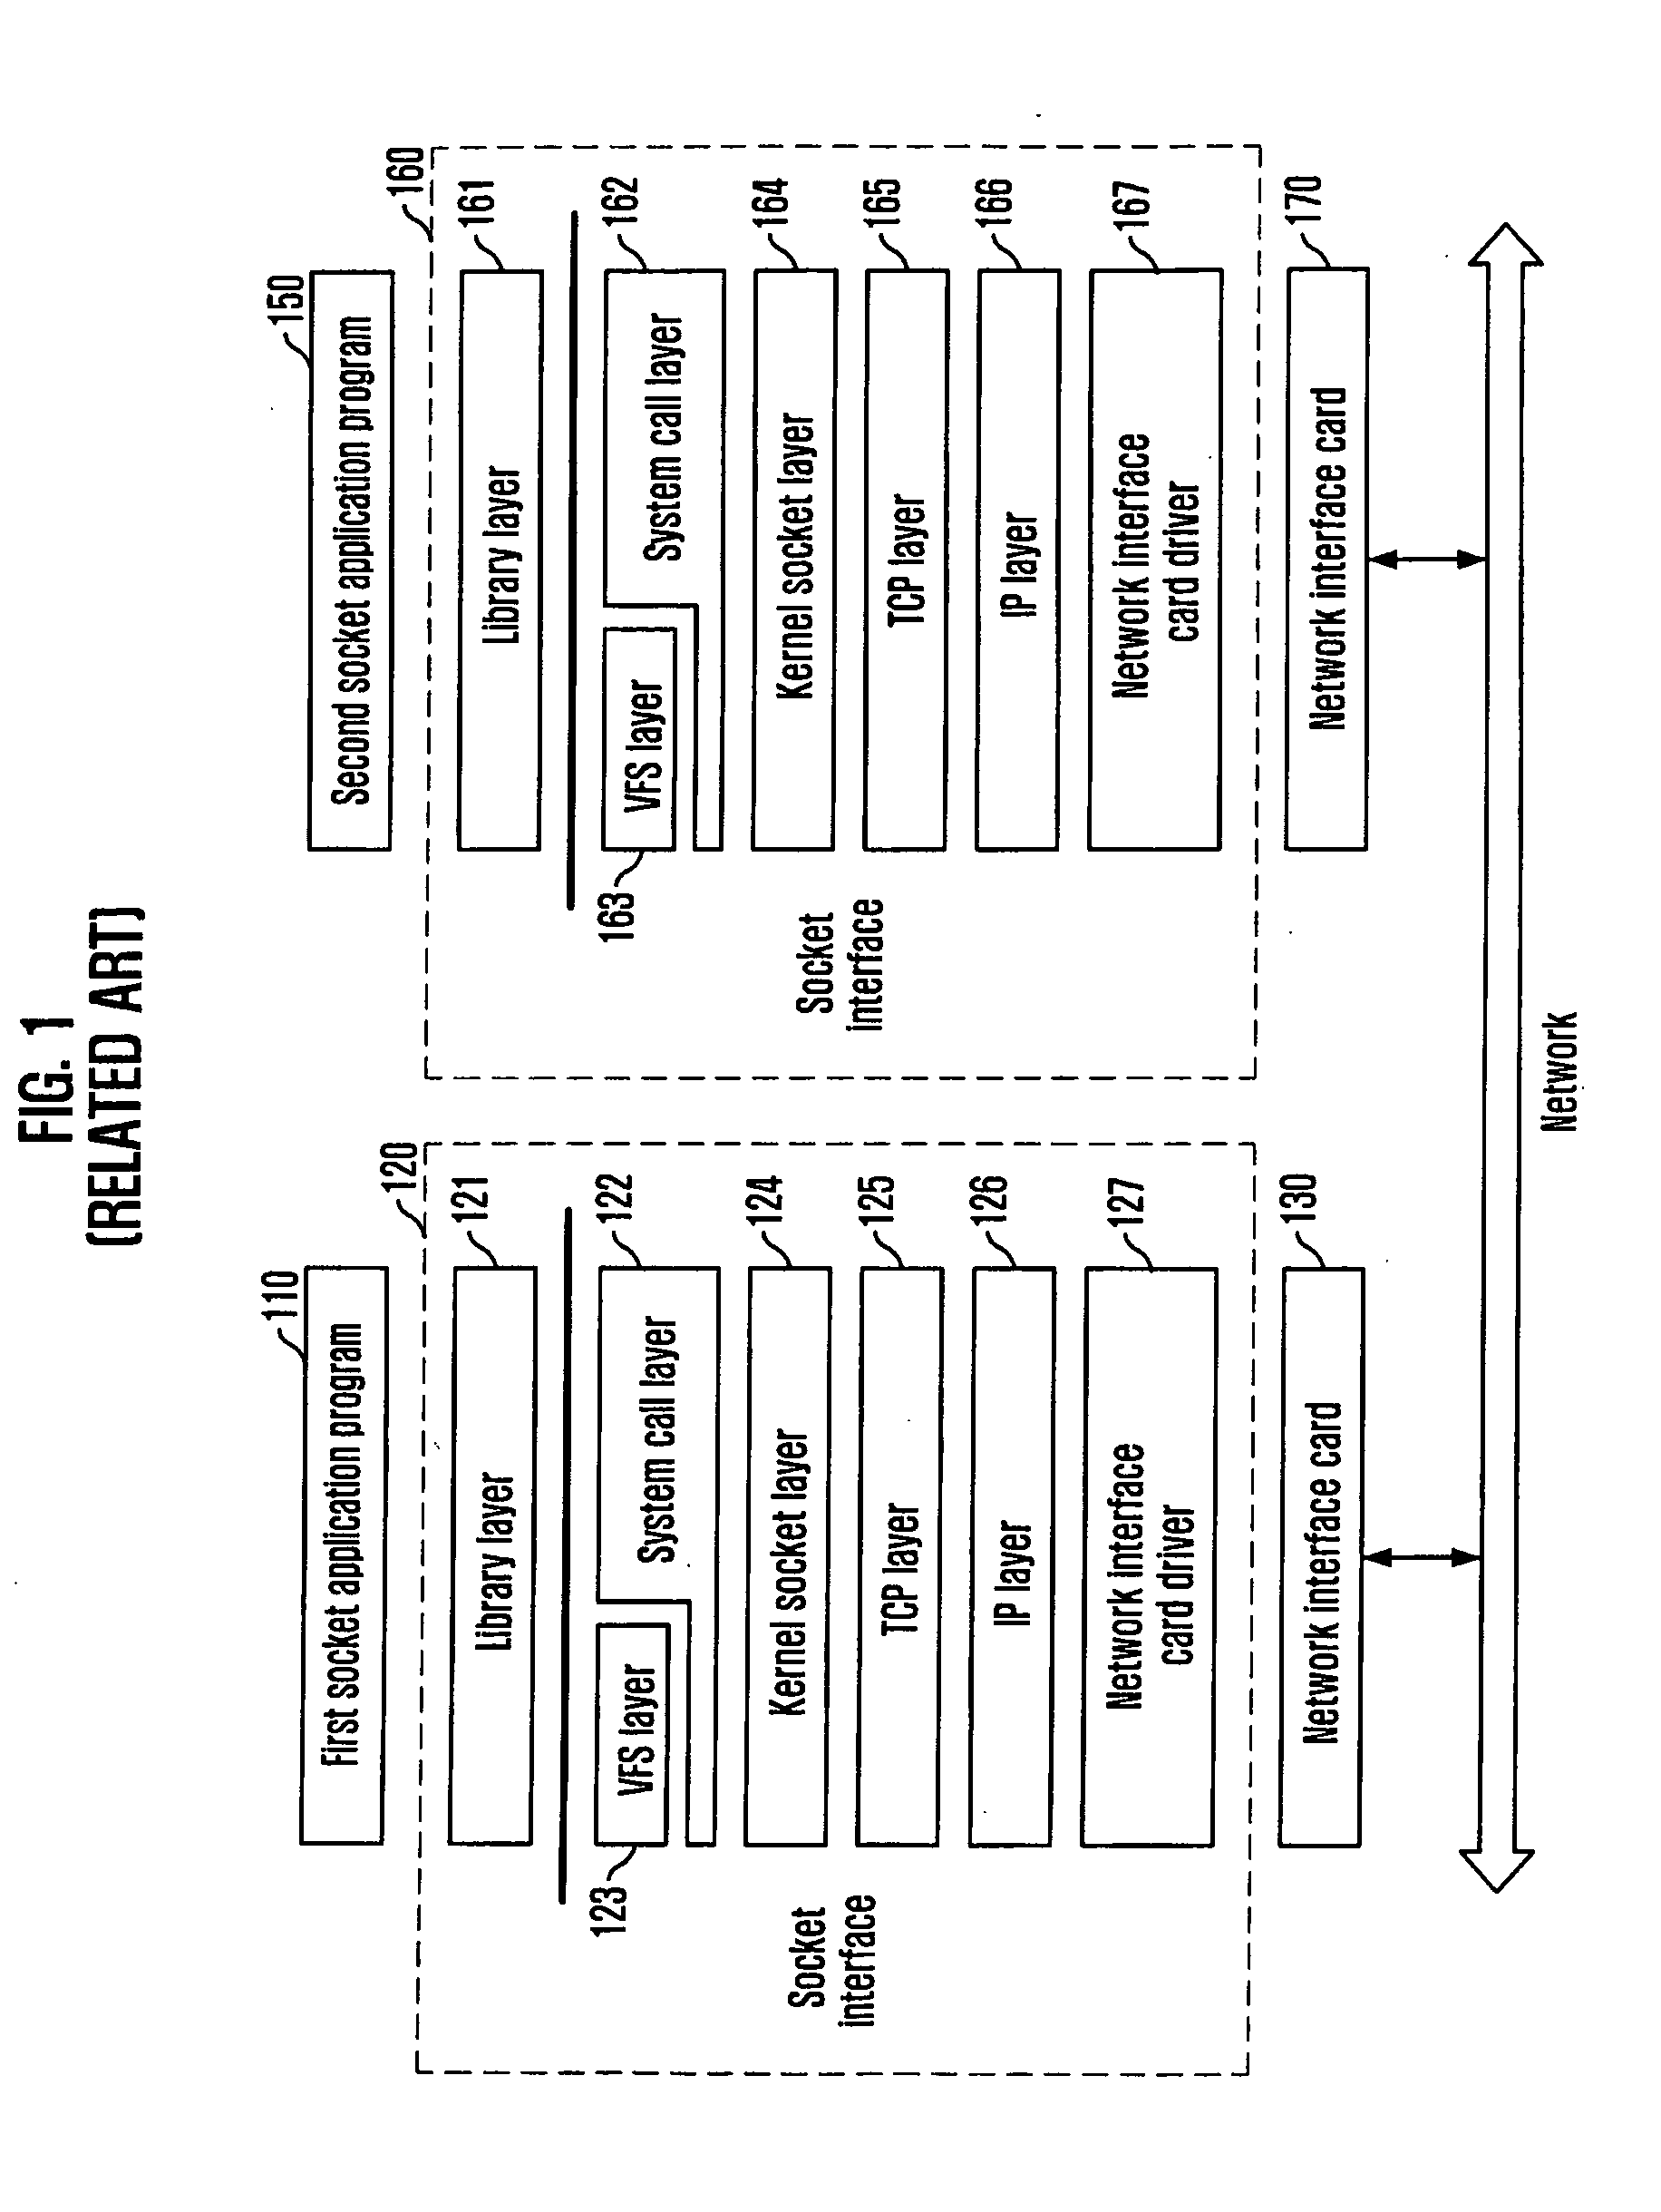 Apparatus and method for communication interface between application programs on virtual machines using shared memory